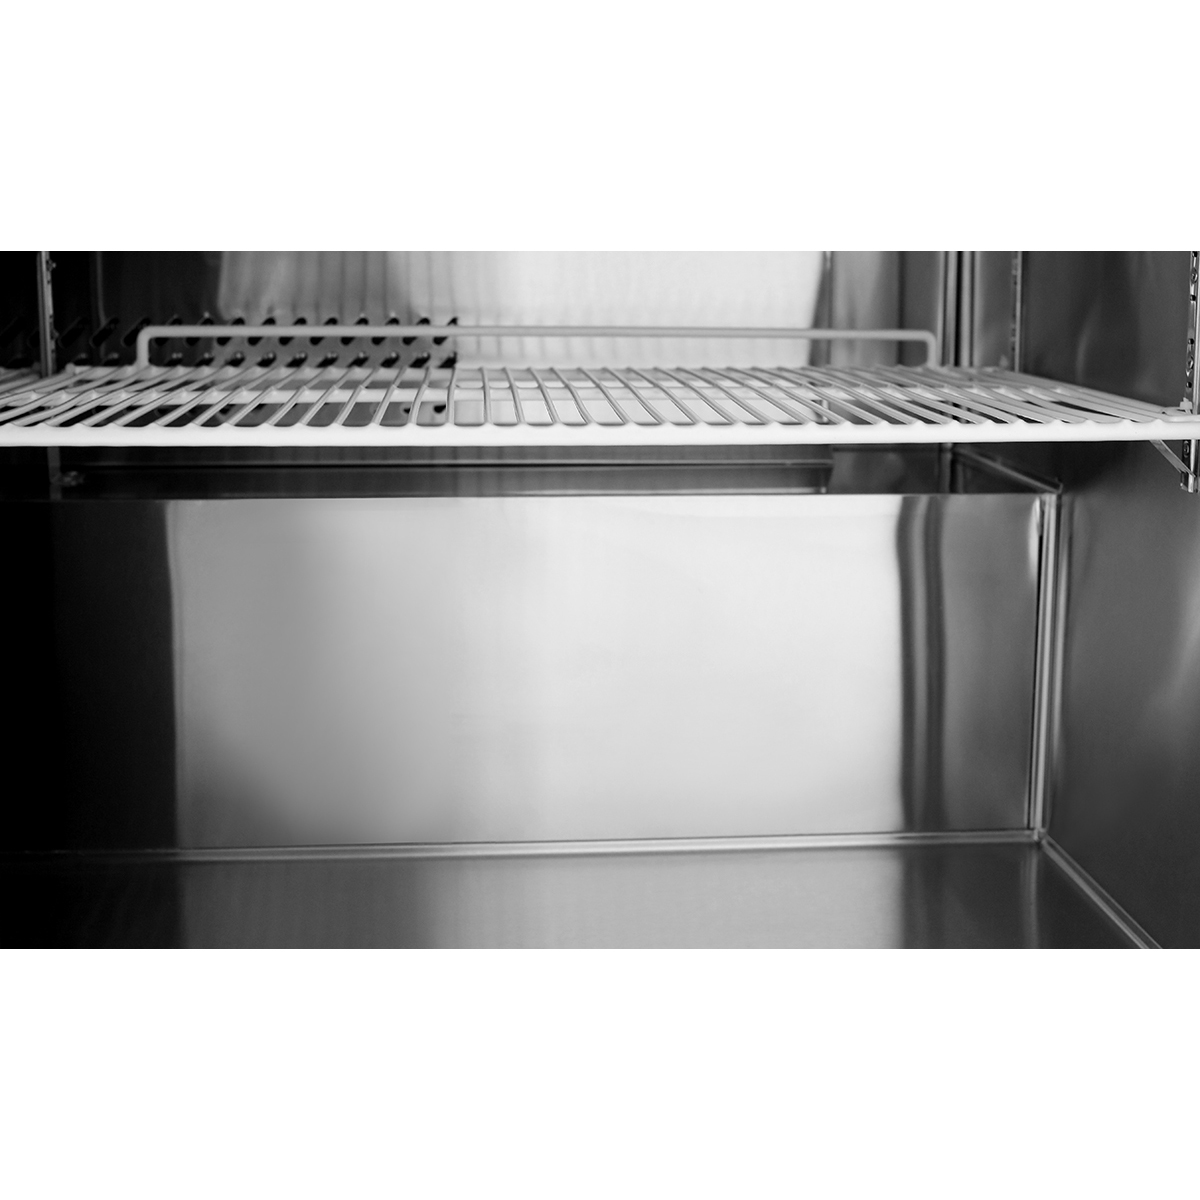 Atosa MGF8402GR 2 Section Rear Mount Undercounter Refrigerator 48-1/4"W x 30"D x 34-1/8"H with 2 Solid Doors image 2